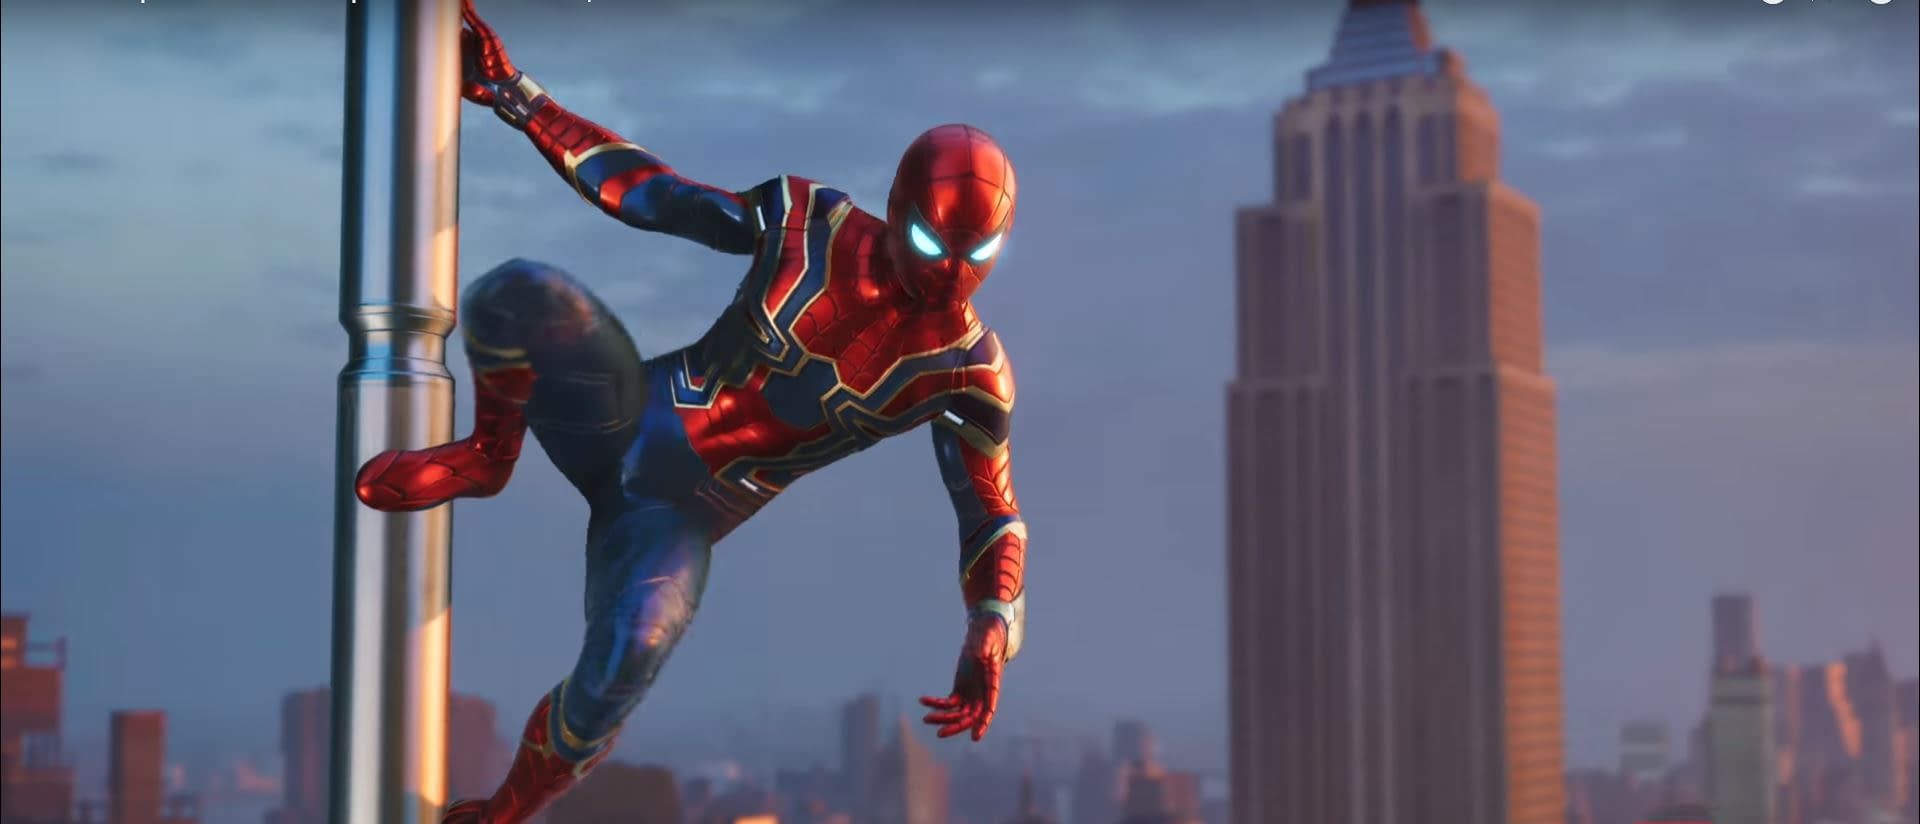 Marvel's Spider-Man Gets An Iron Spider Suit From Avengers: Infinity War as  Pre-Order Bonus